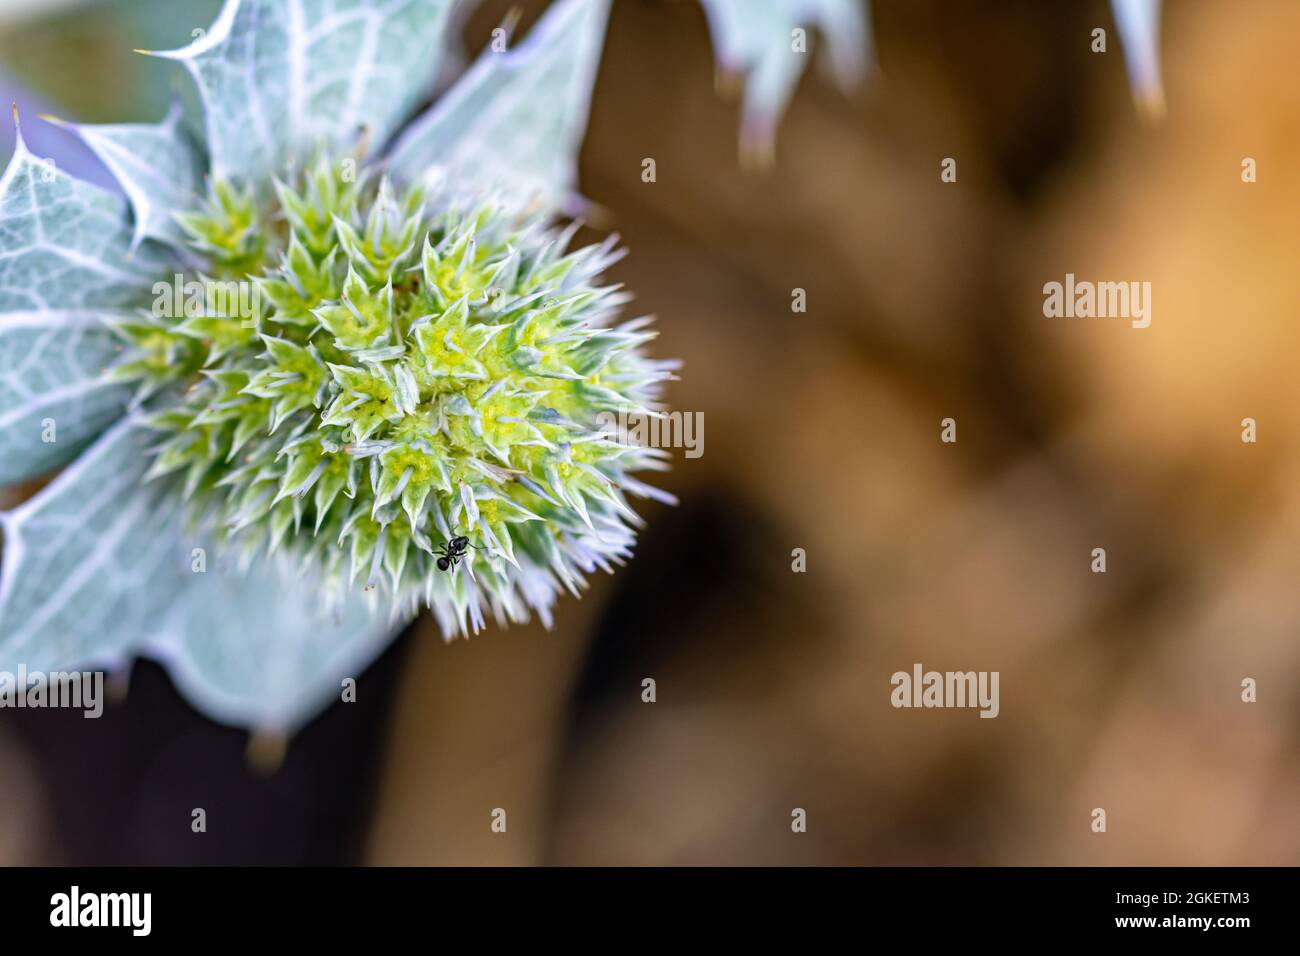 a wallpaper background image of a single green cactus flower on the left corner Stock Photo